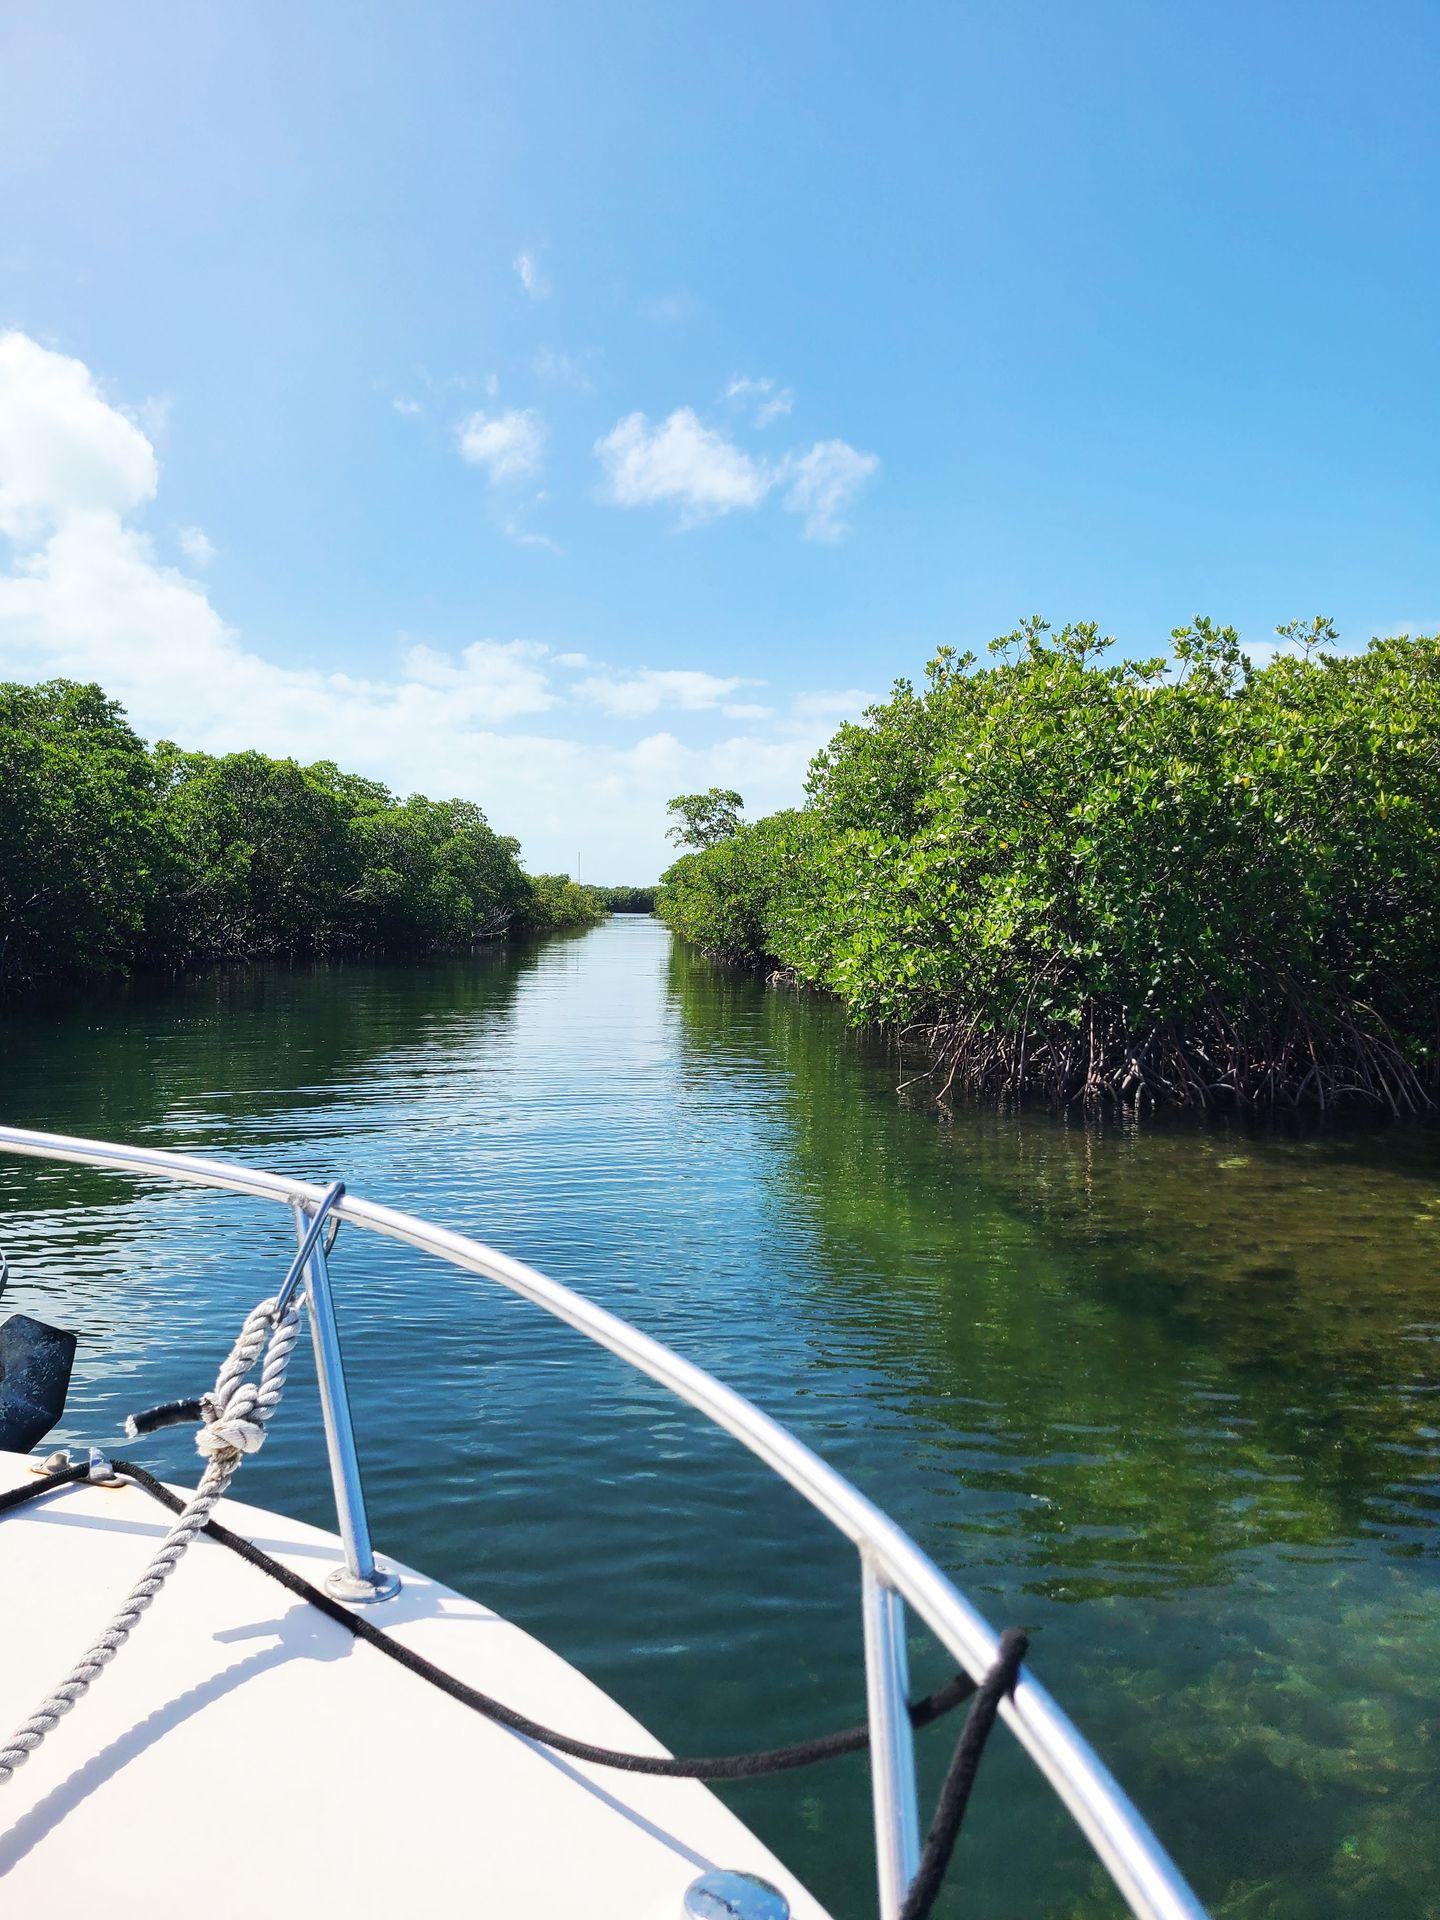 Looking off a boat at a narrow waterway surounded by mangrove trees on both sides.